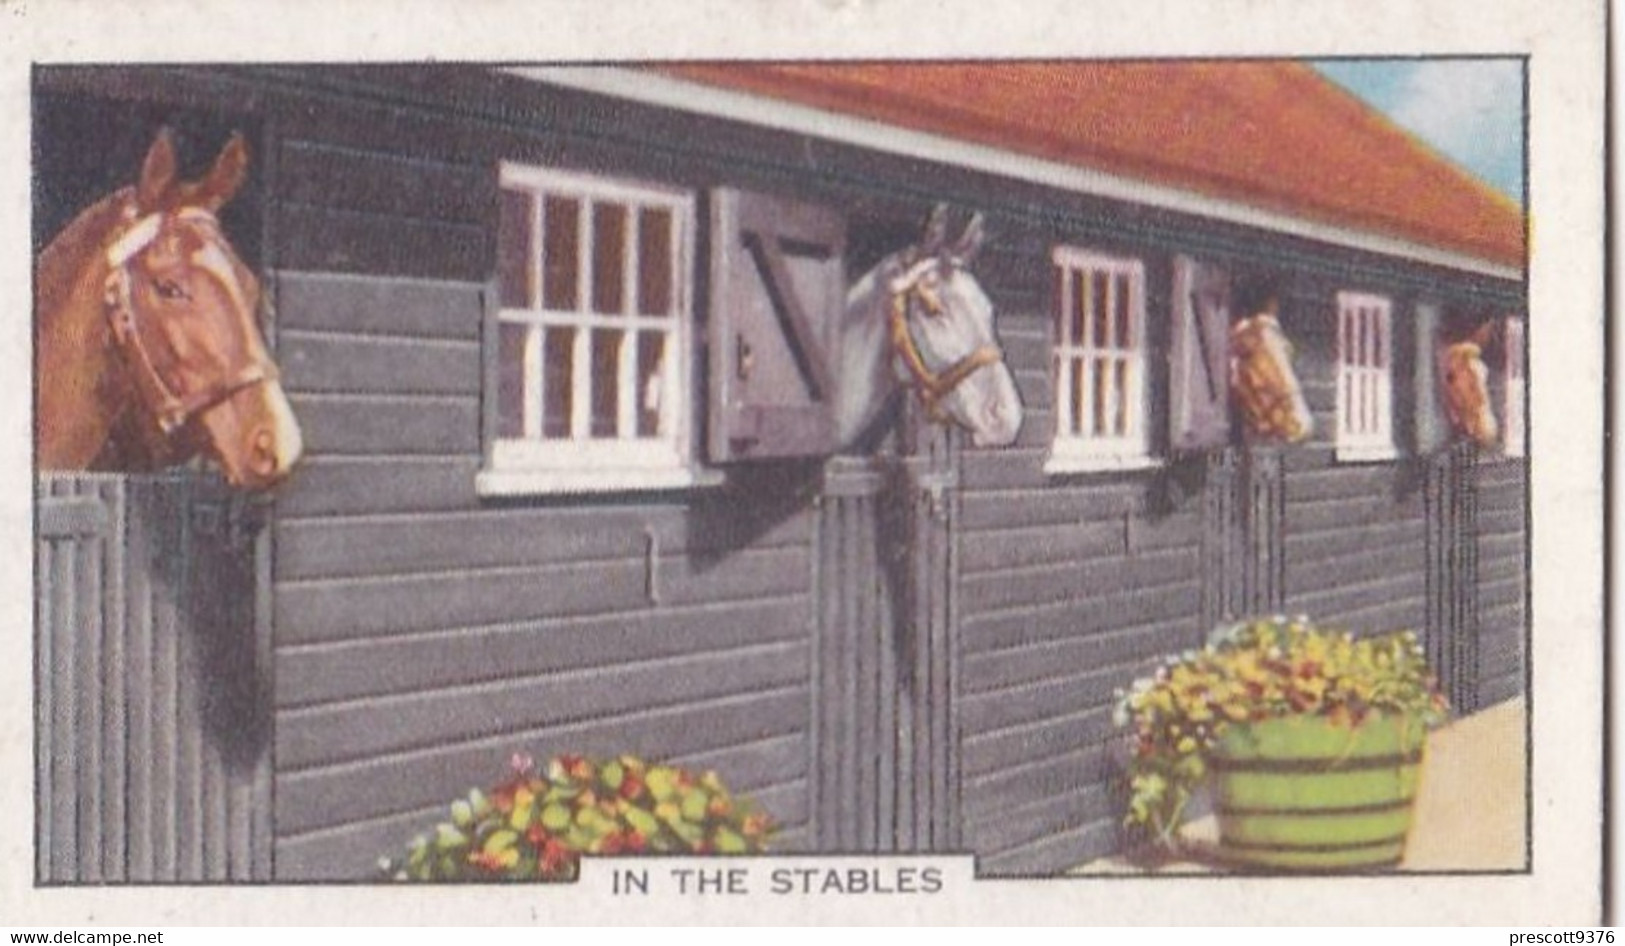 Racing Scenes 1938 - 7 In The Stables  - Gallaher Cigarette Card - Original - Horses - Gallaher